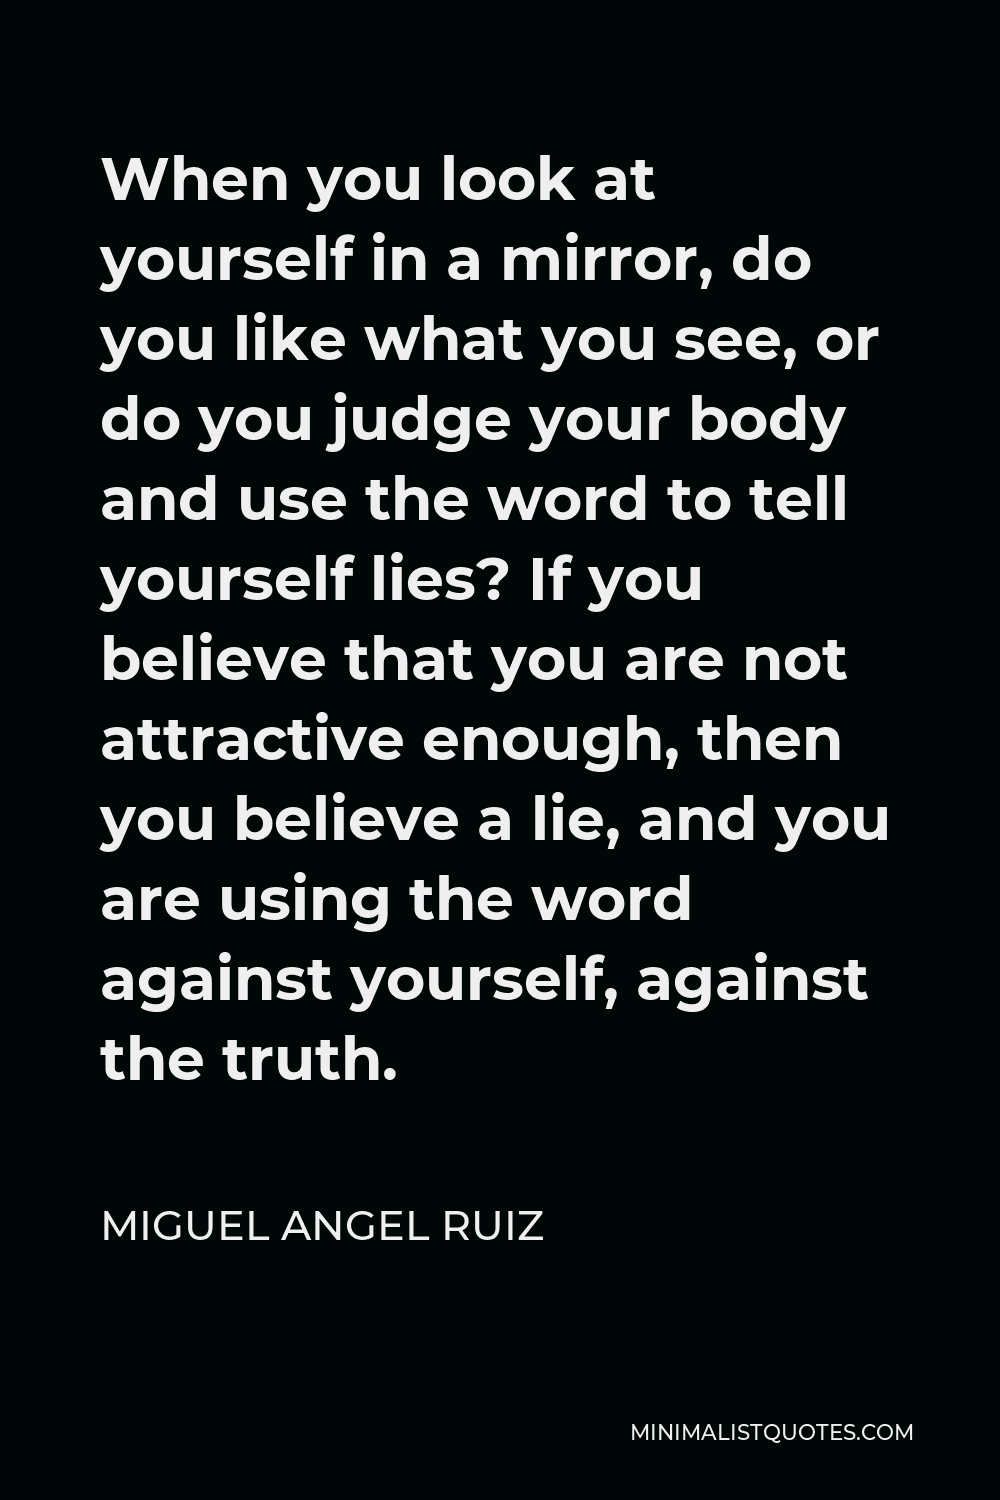 Miguel Angel Ruiz Quote - When you look at yourself in a mirror, do you like what you see, or do you judge your body and use the word to tell yourself lies? If you believe that you are not attractive enough, then you believe a lie, and you are using the word against yourself, against the truth.